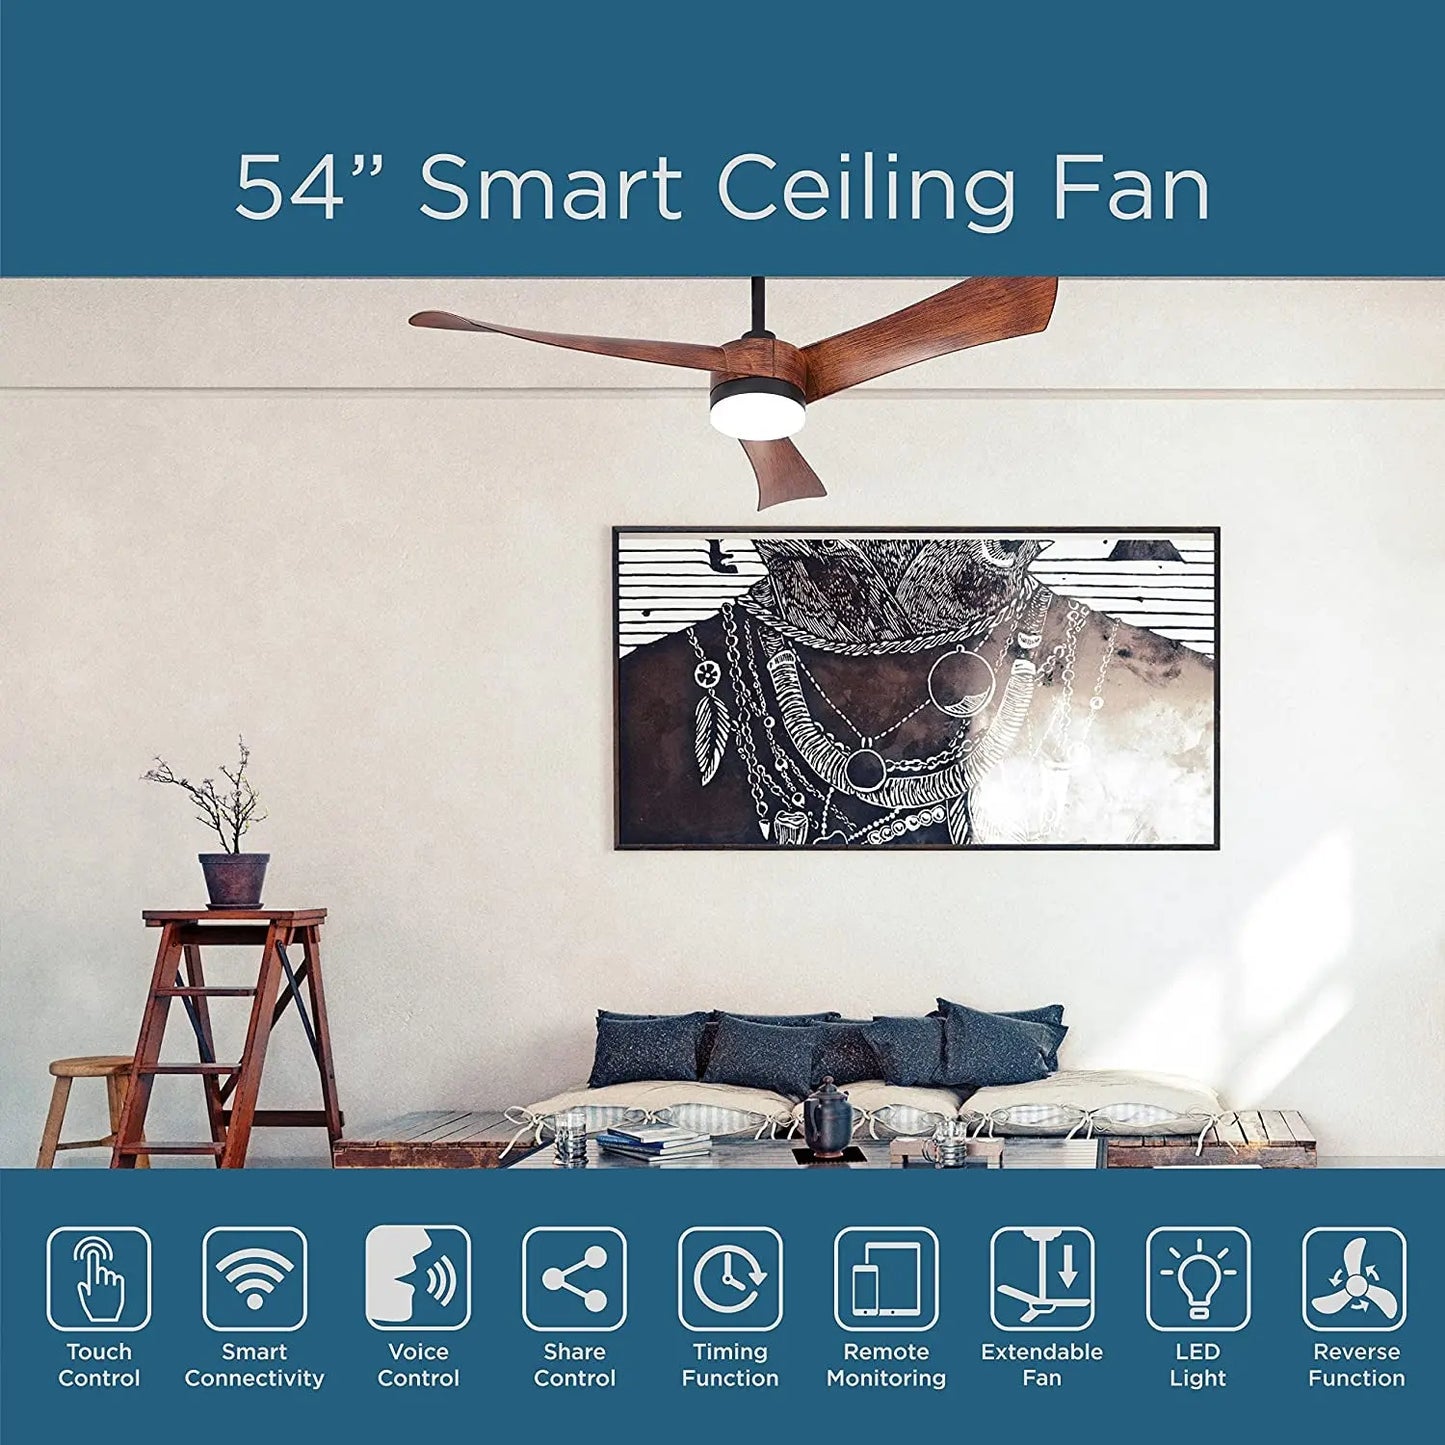 Smart Ceiling Fan 56" 3-Blade with LED Lights, High-Powered Quiet Fan with 6 Speeds and Reverse Function, Wifi Control Fan with 3 Color Temperatures, Works with Tuya Smart, Alexa and Google